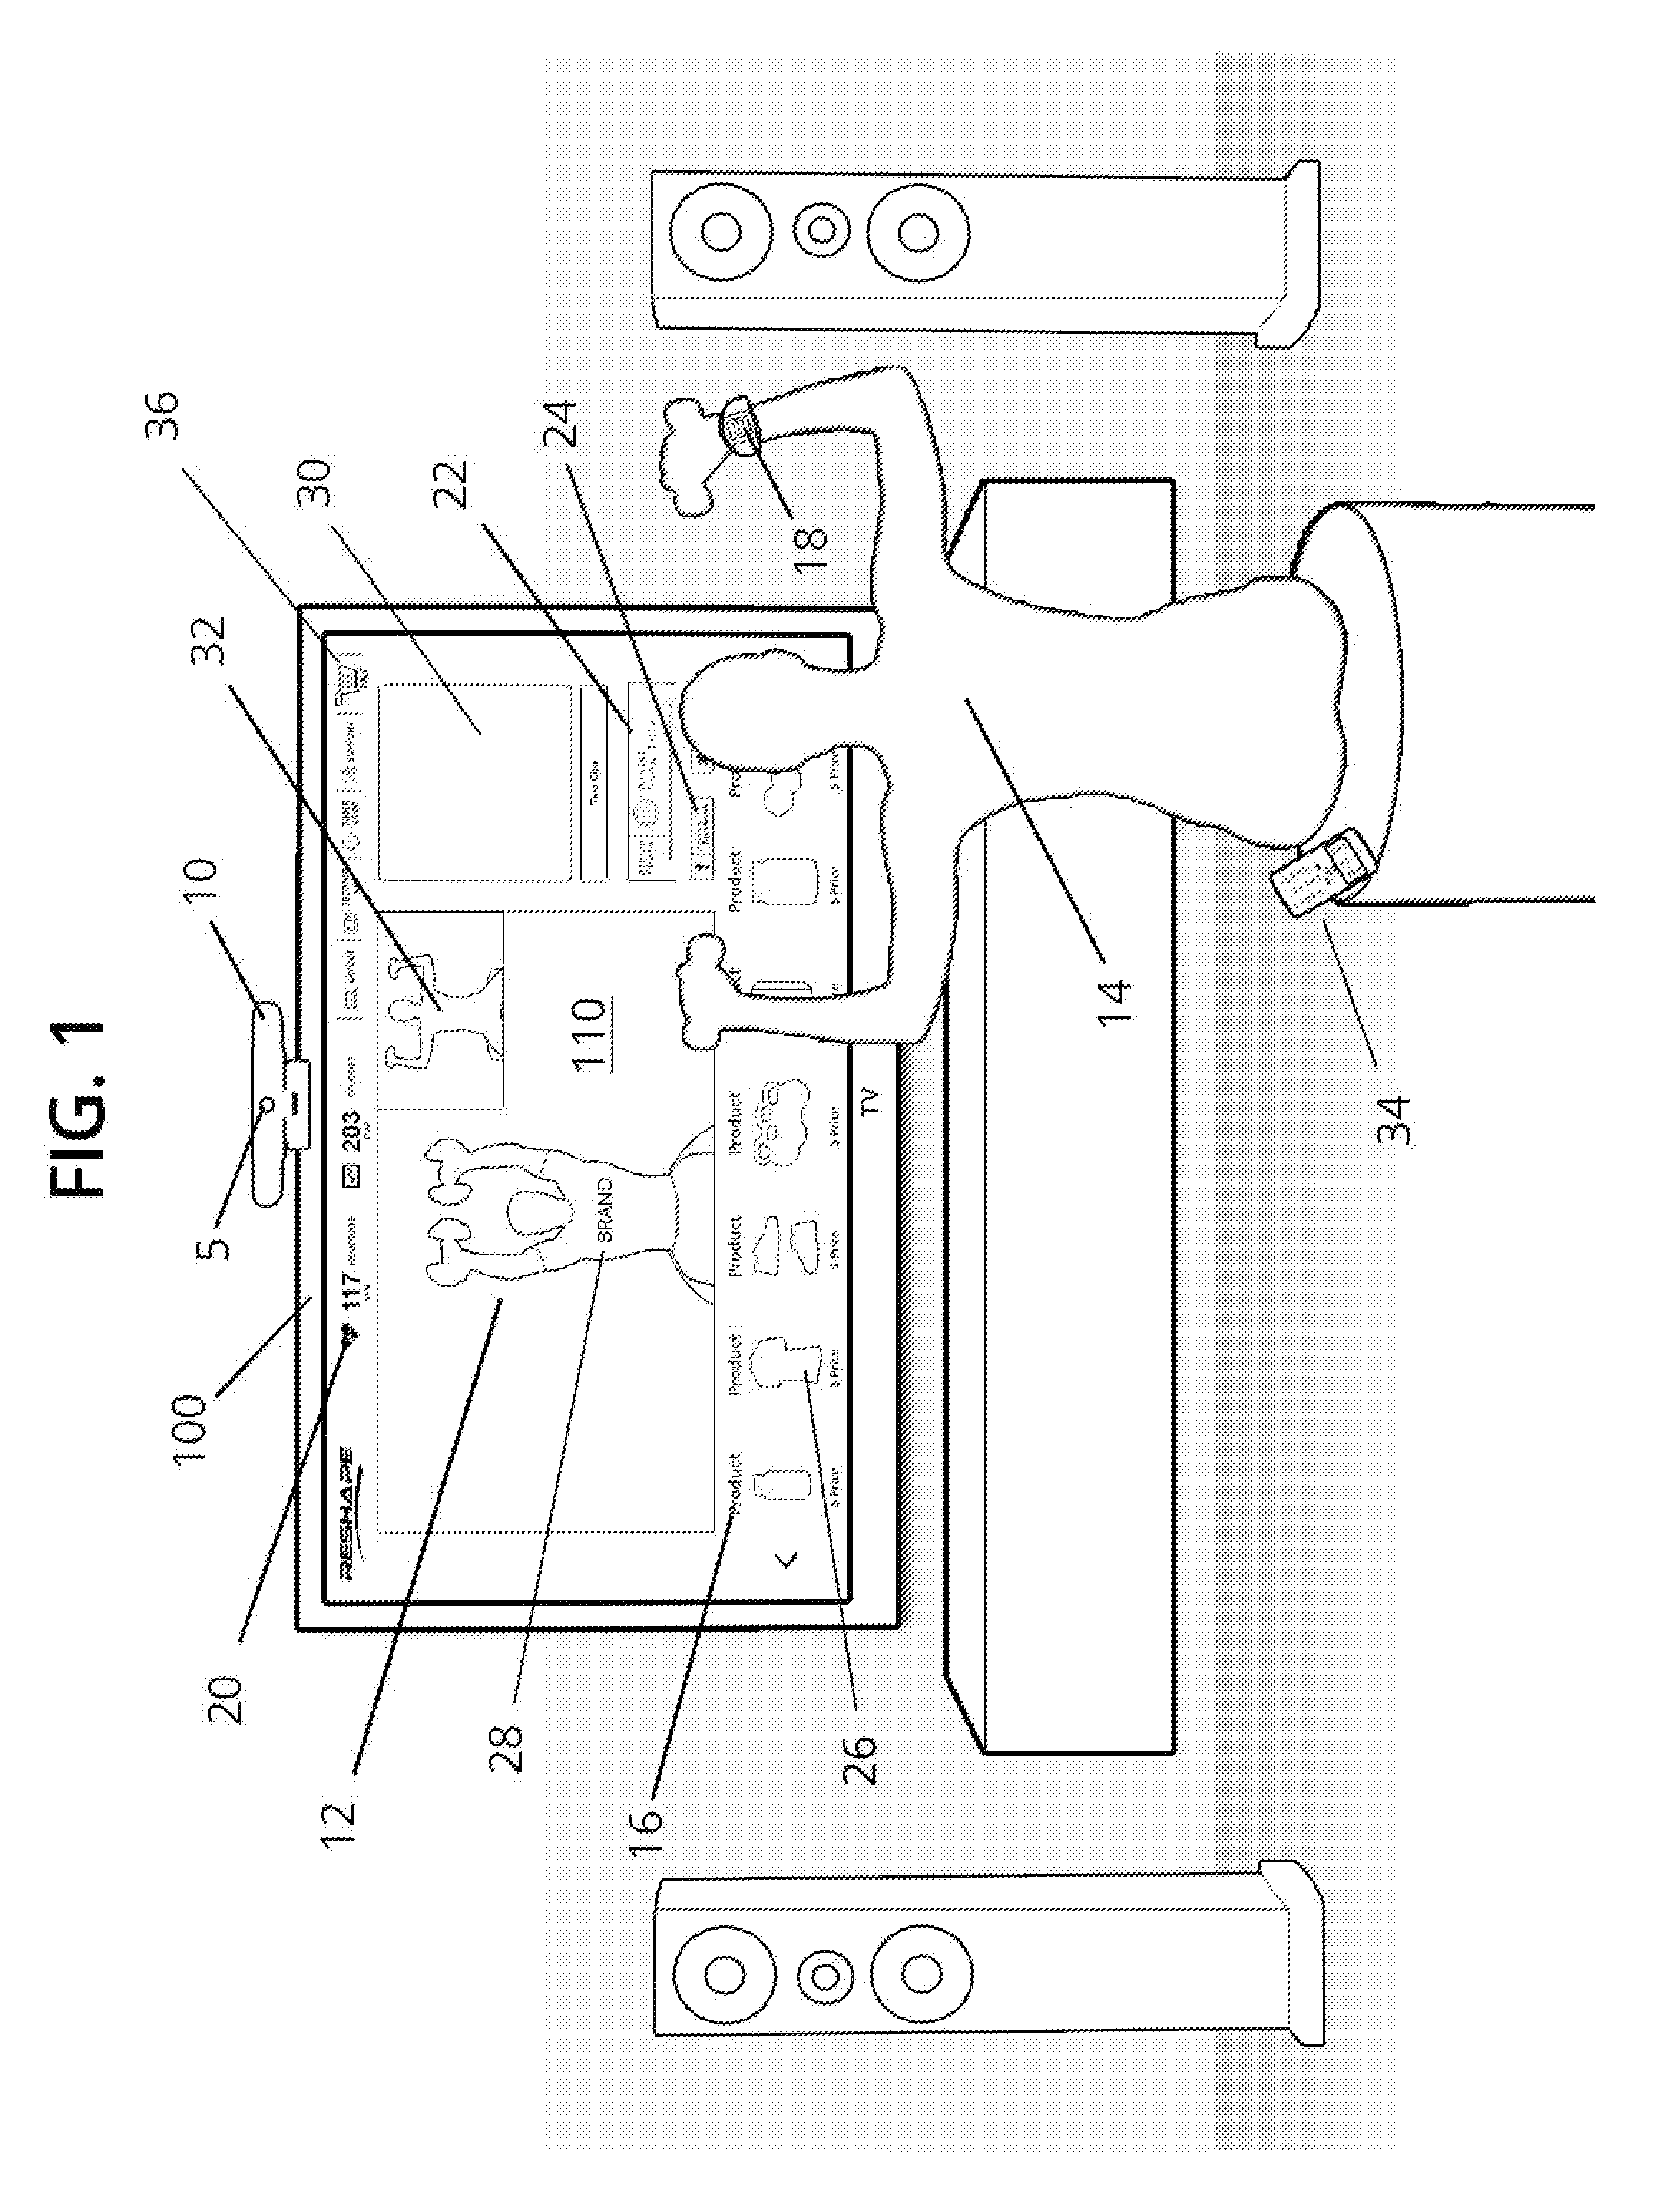 Interactive Two-Way Live Video Communication Platform and Systems and Methods Thereof